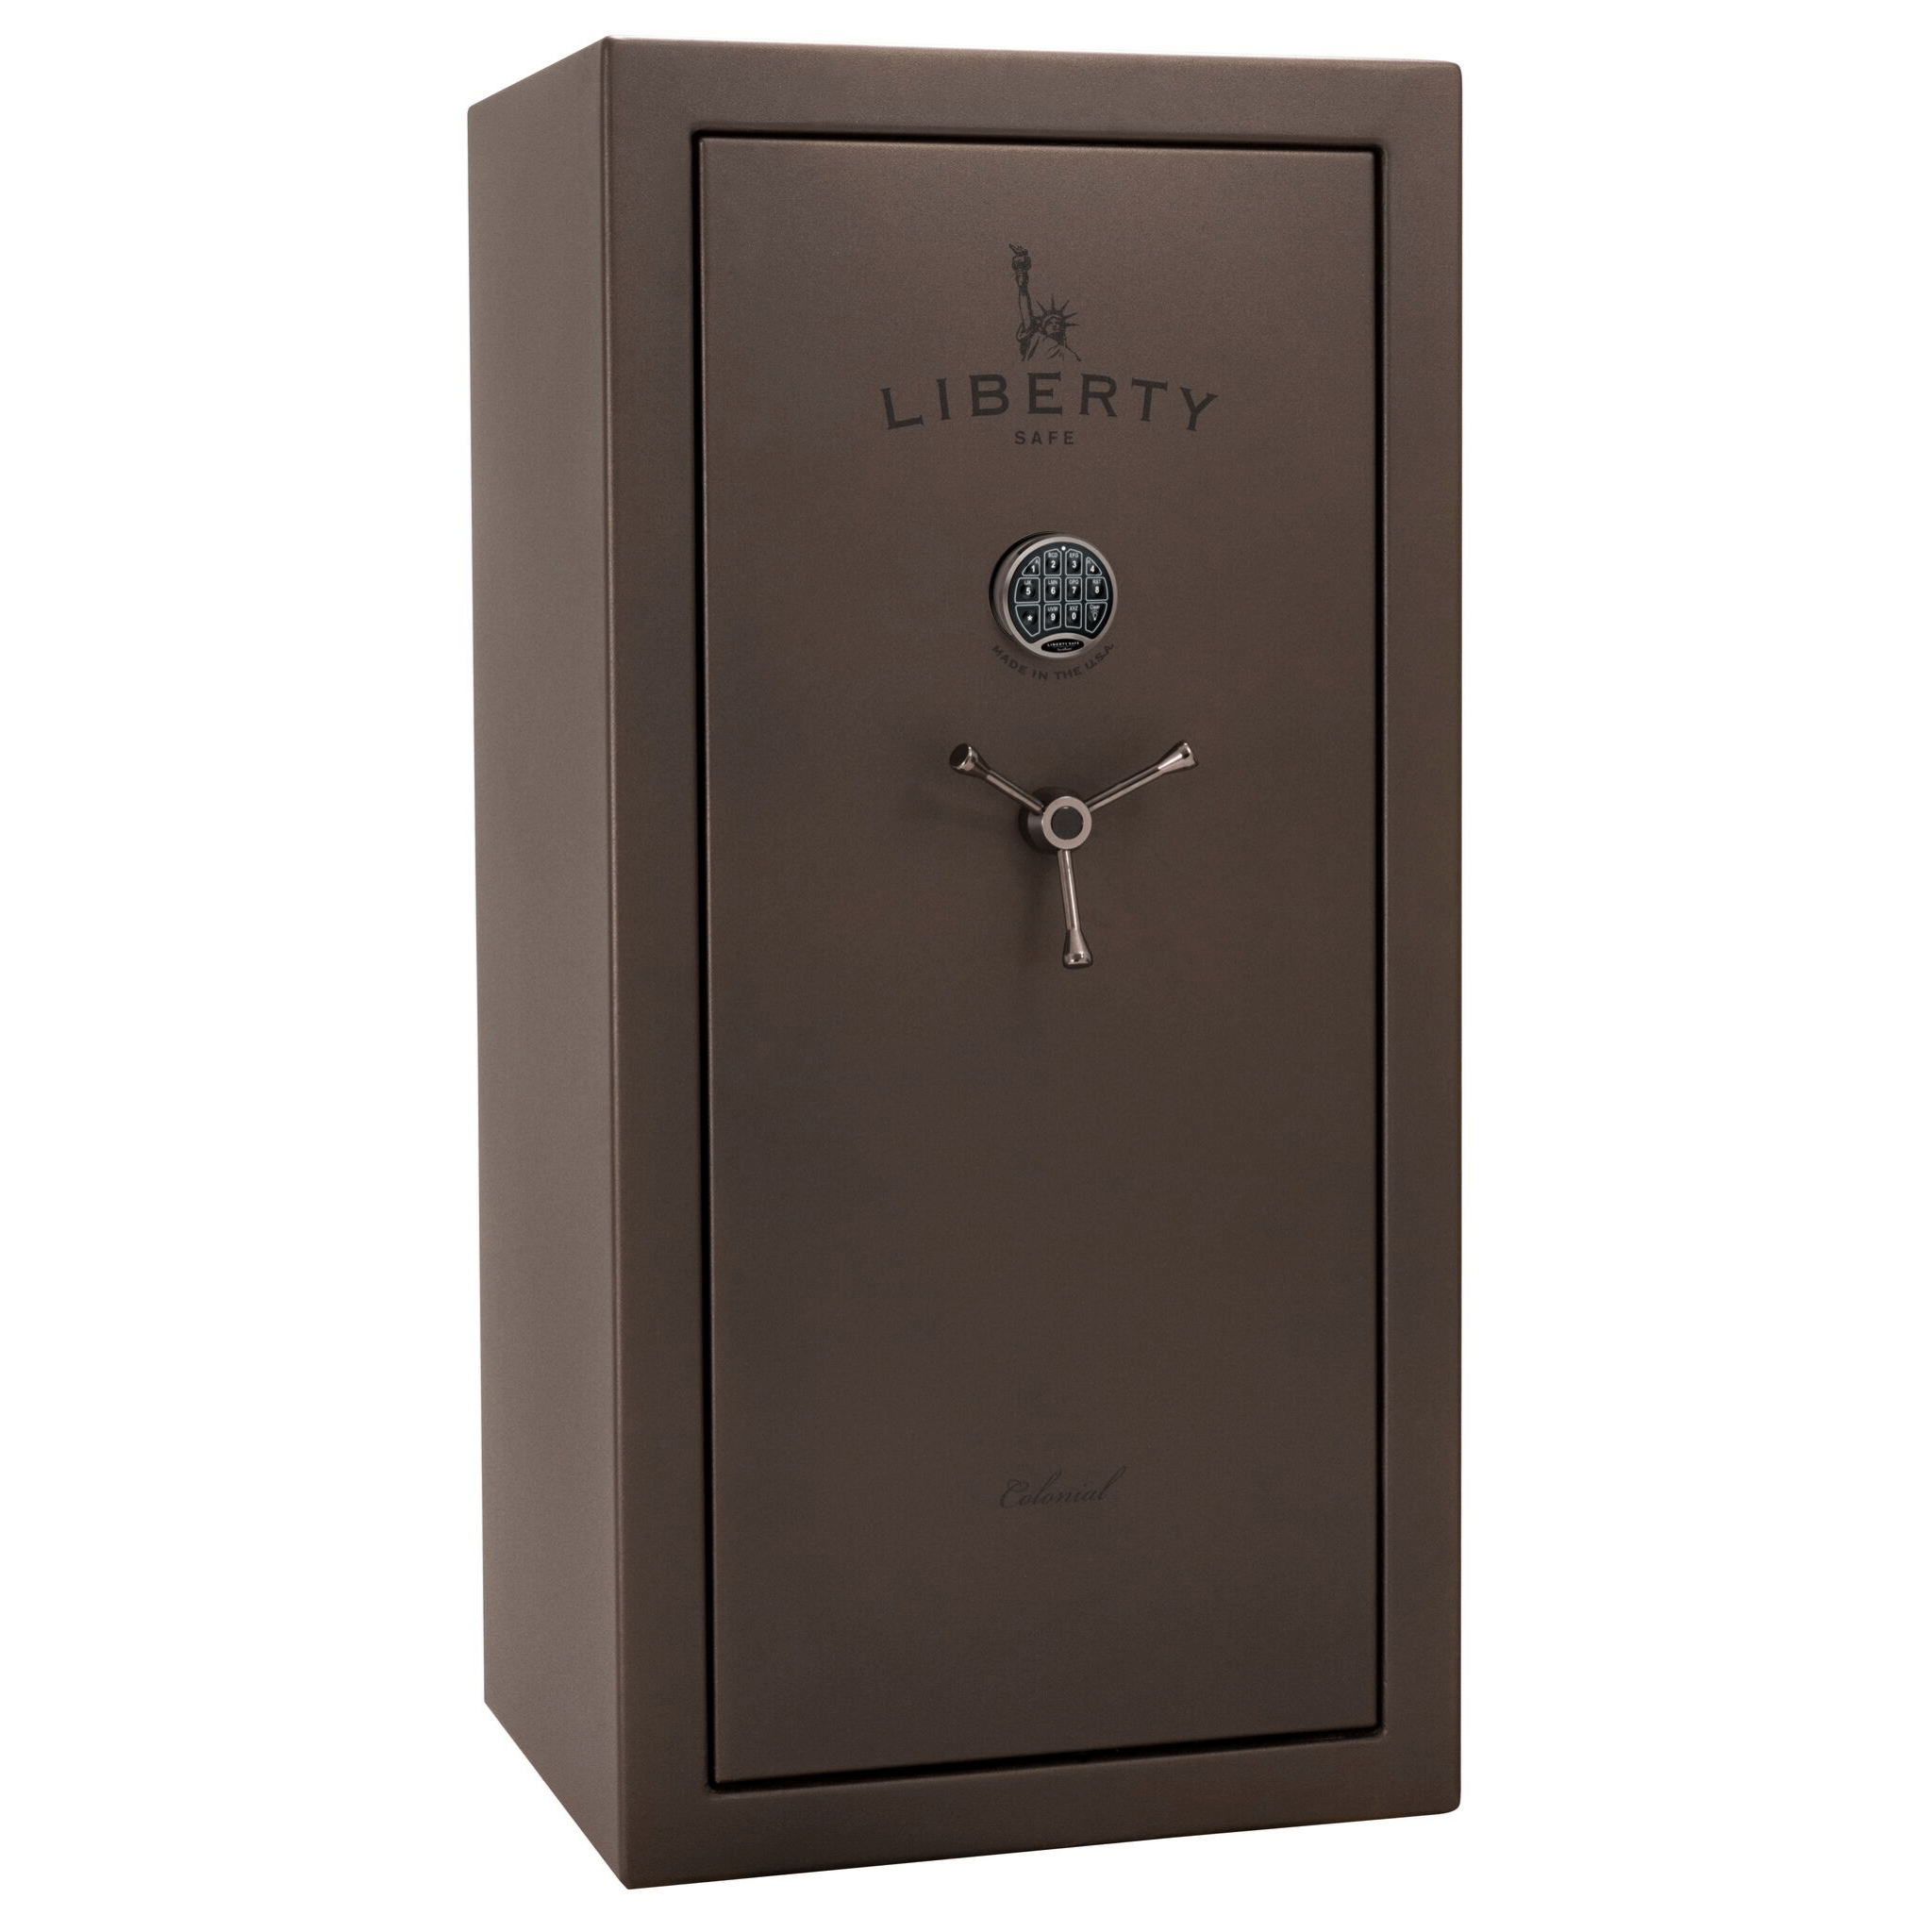 Colonial Series | Level 3 Security | 75 Minute Fire Protection | 23 | DIMENSIONS: 60.5"(H) X 30"(W) X 25"(D) | Granite Textured | Electronic Lock, photo 3